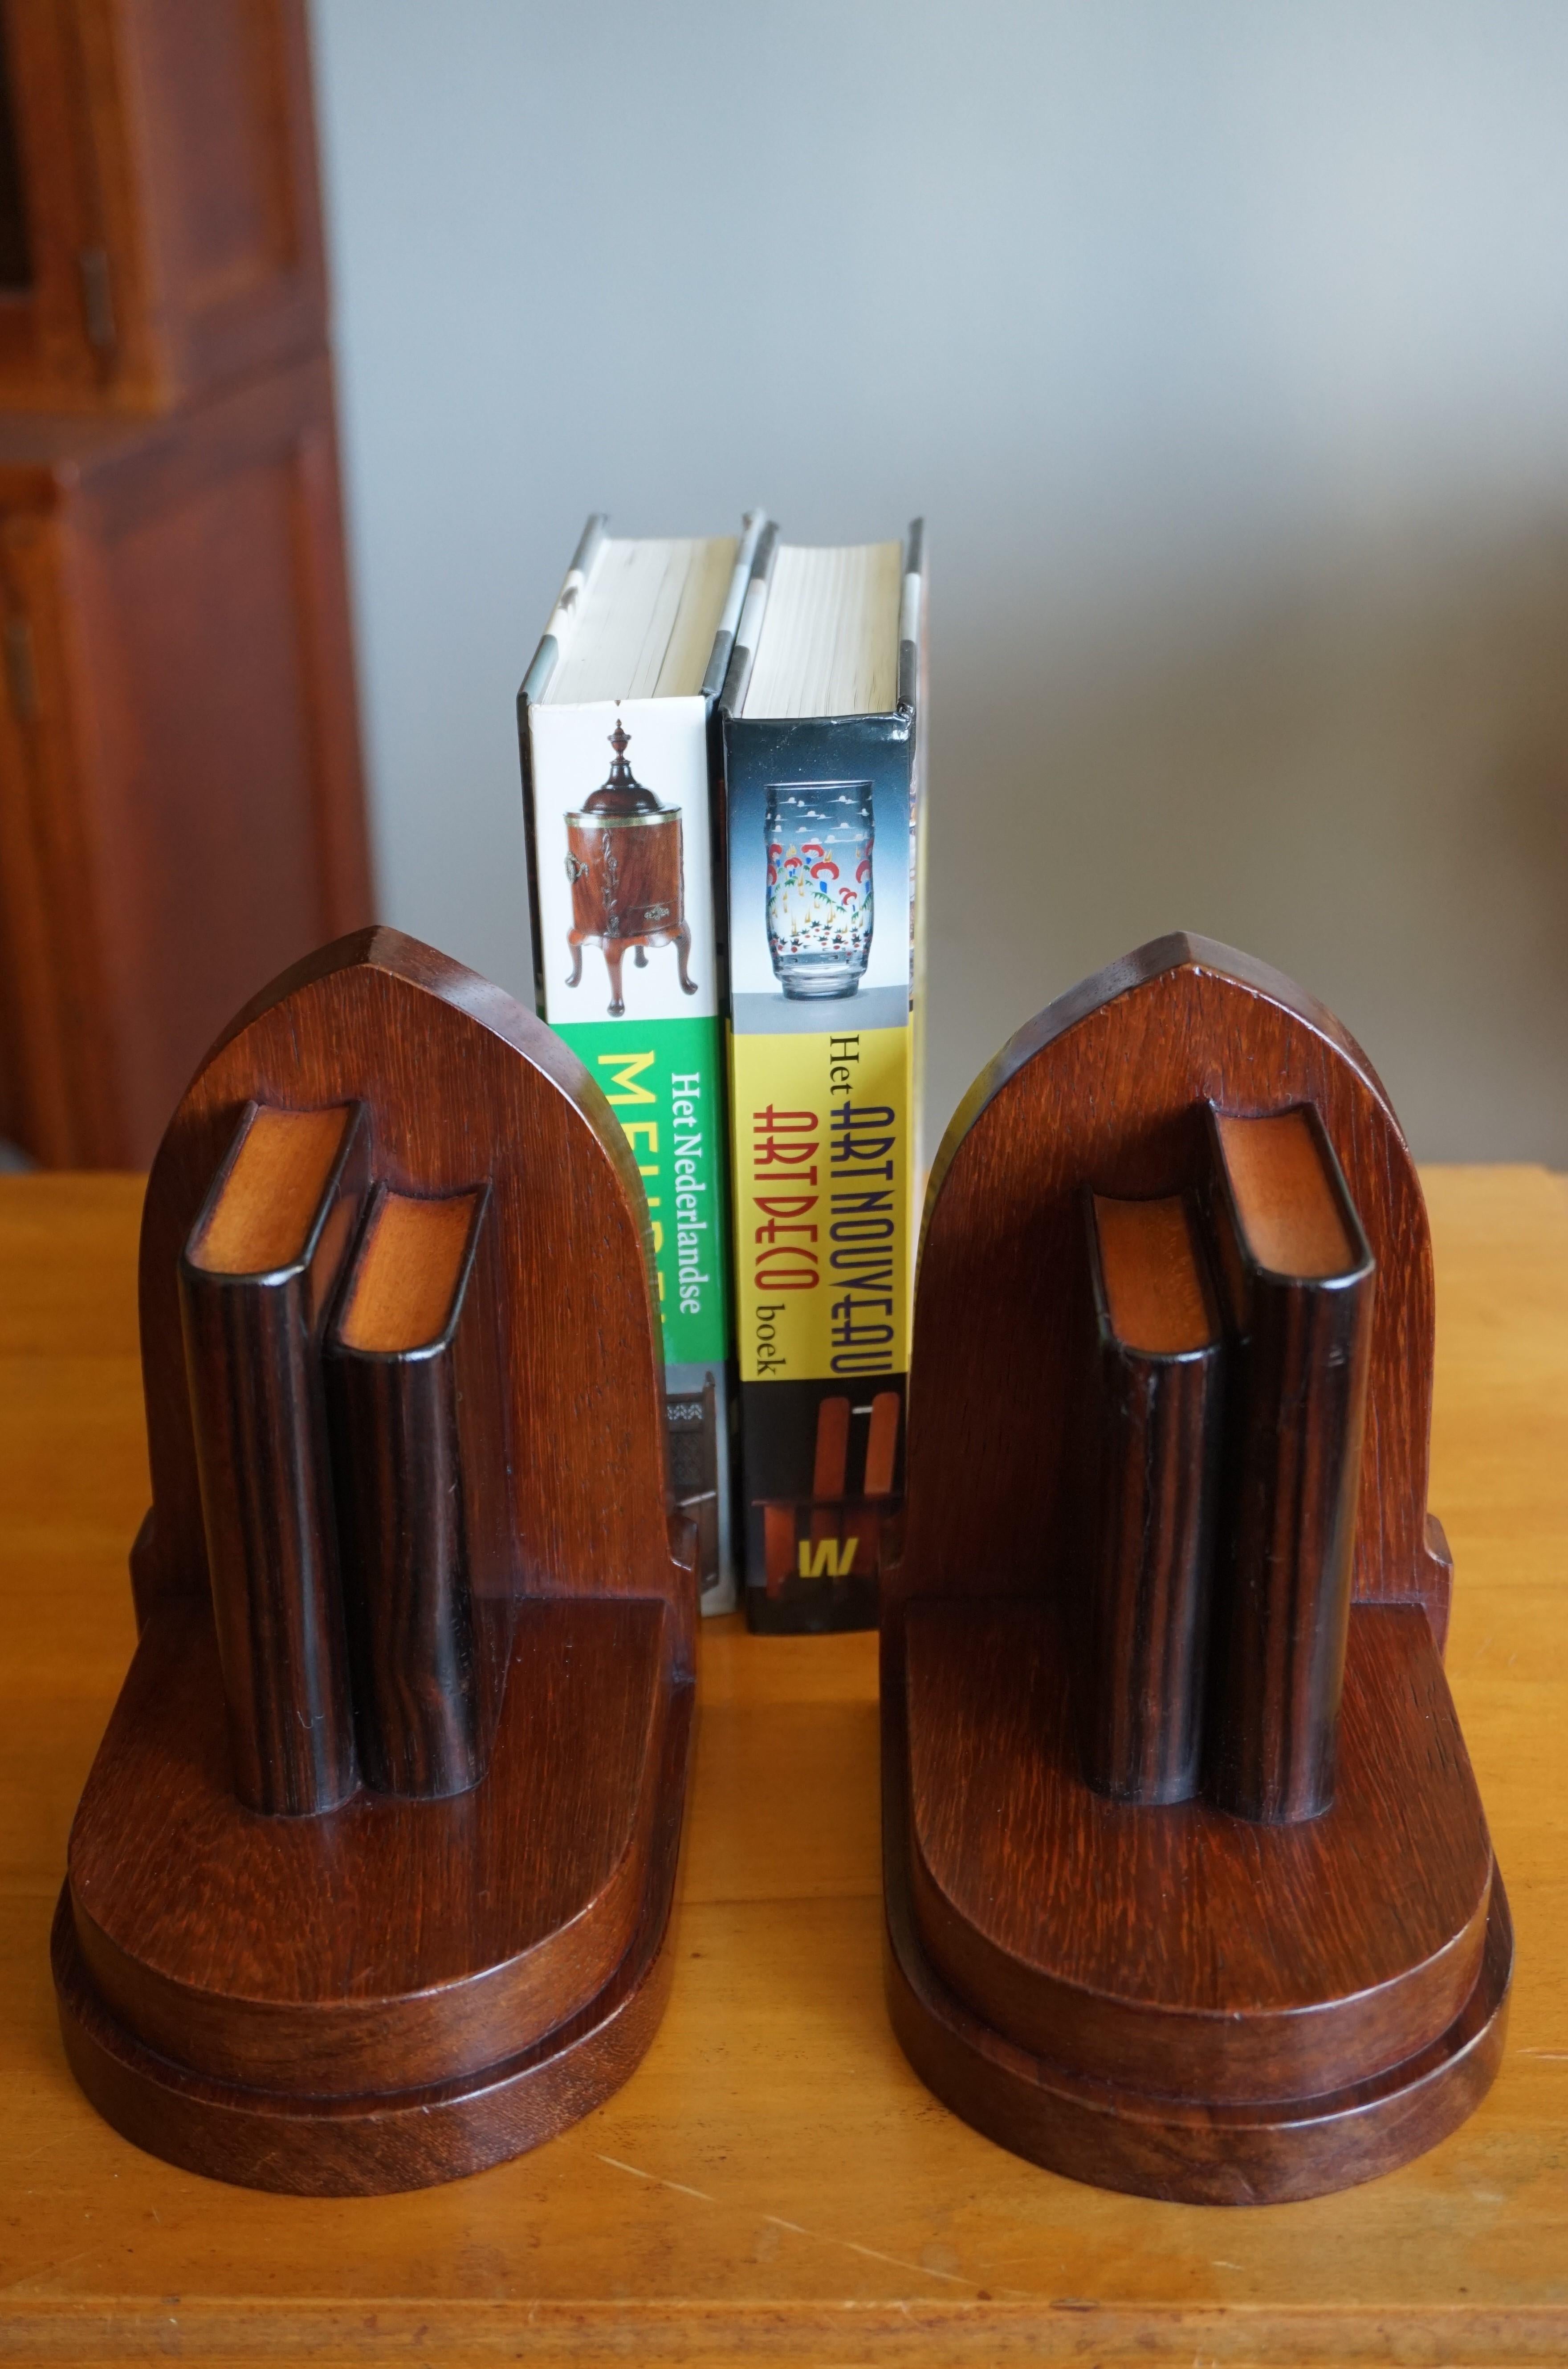 Superbly handcrafted, small size and excellent condition Dutch Art Deco bookends.

These exceptionally well crafted, Dutch Art Deco bookends from the early 1900s are in very good condition and they truly are a joy to own and look at. These solid